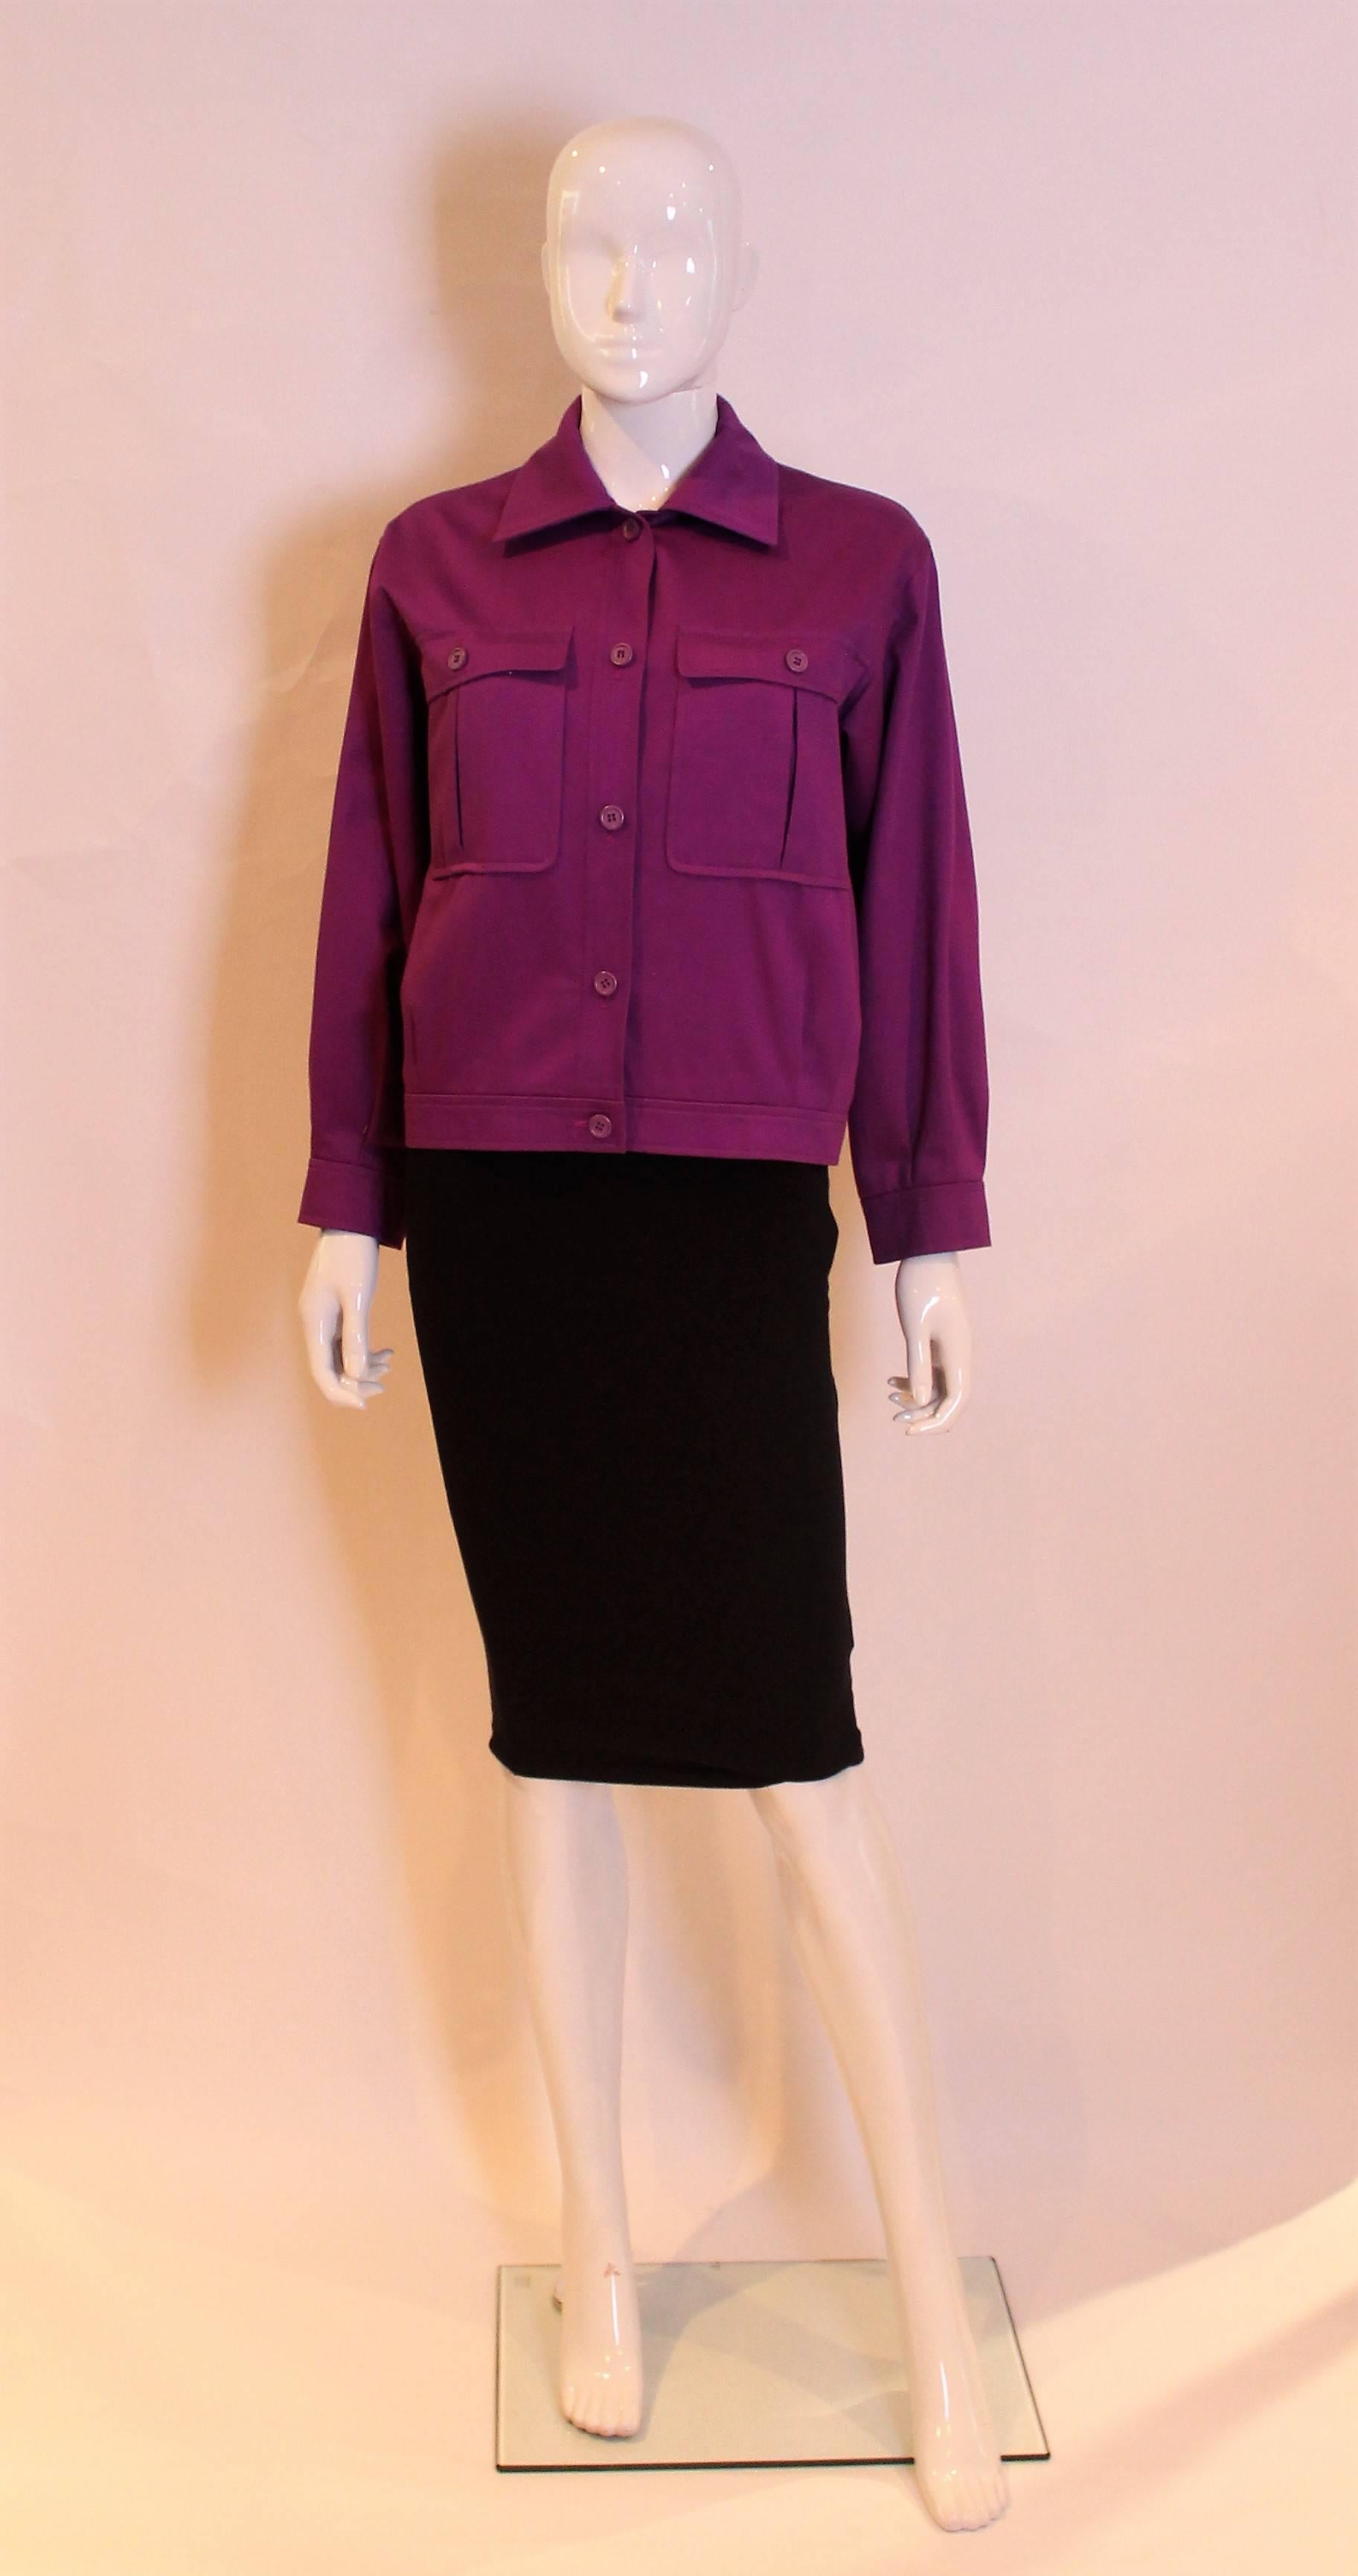 A chic bomber style jacket by Yves Saint Laurent Rive Gauche. In a striking purple colour,this jacket has two breast pockets with buttons, a five button central opening and single button cuffs.